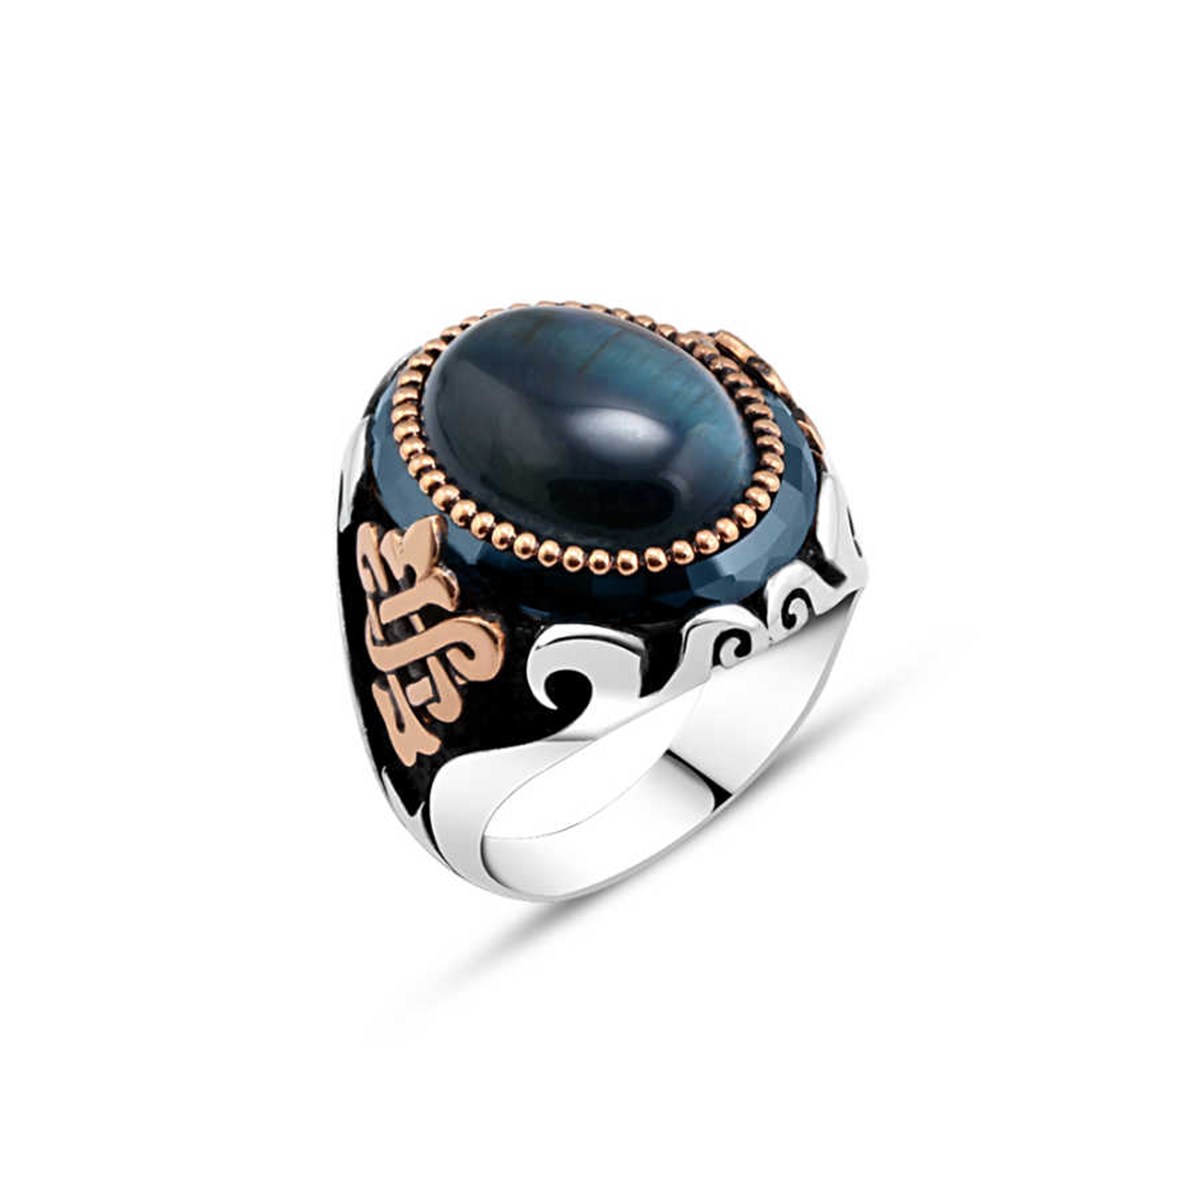 Blue Tiger Eye Sterling Silver Men's Ring with Hood Stone